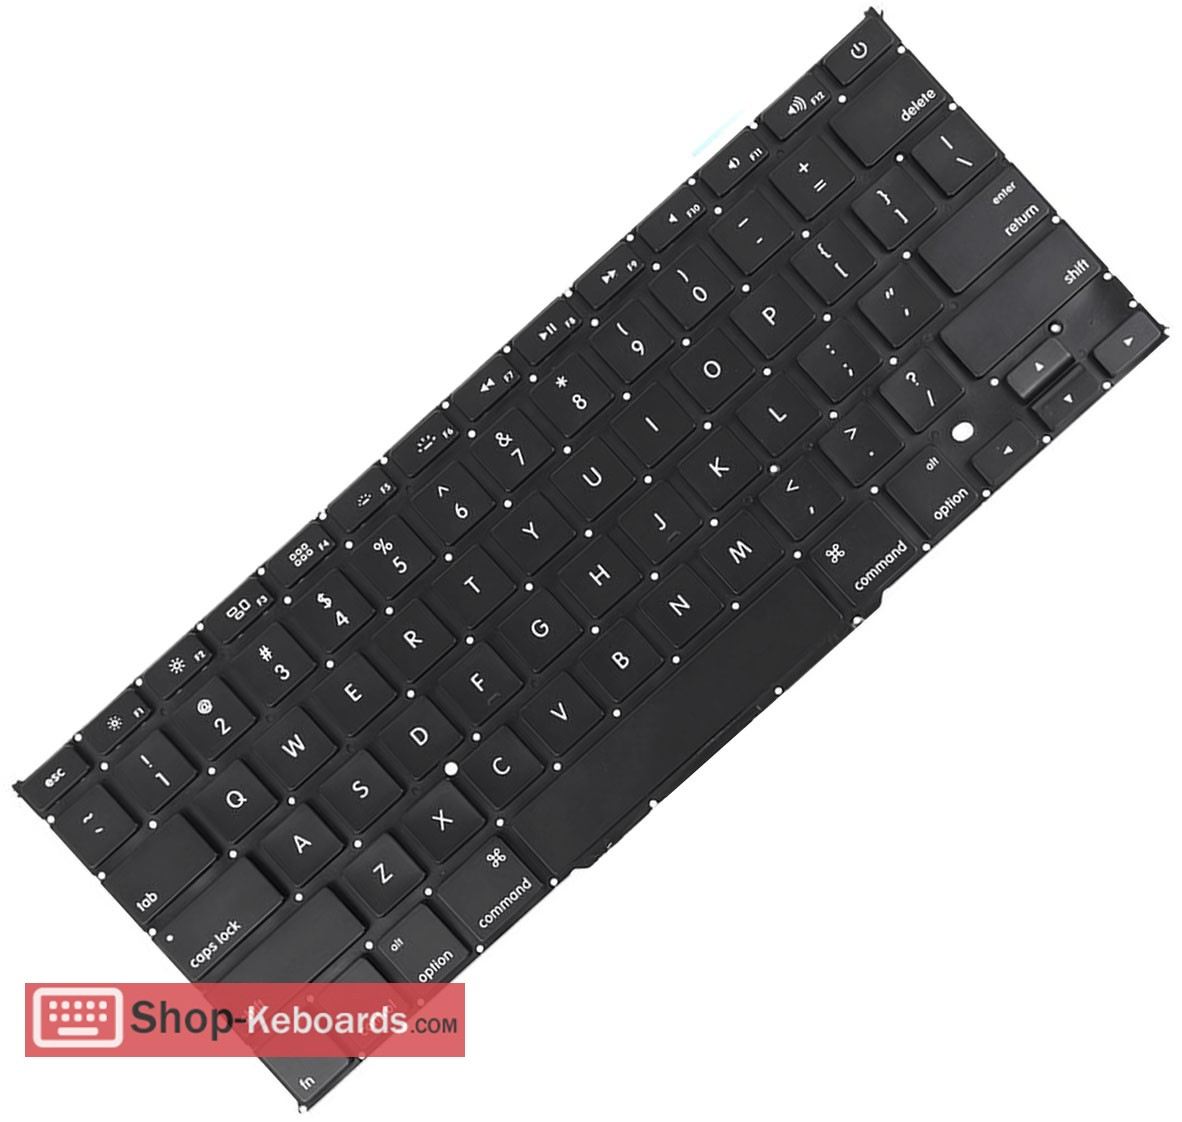 Apple Macbook Pro 15 Inch Retina A1398 (Late 2013) Keyboard replacement